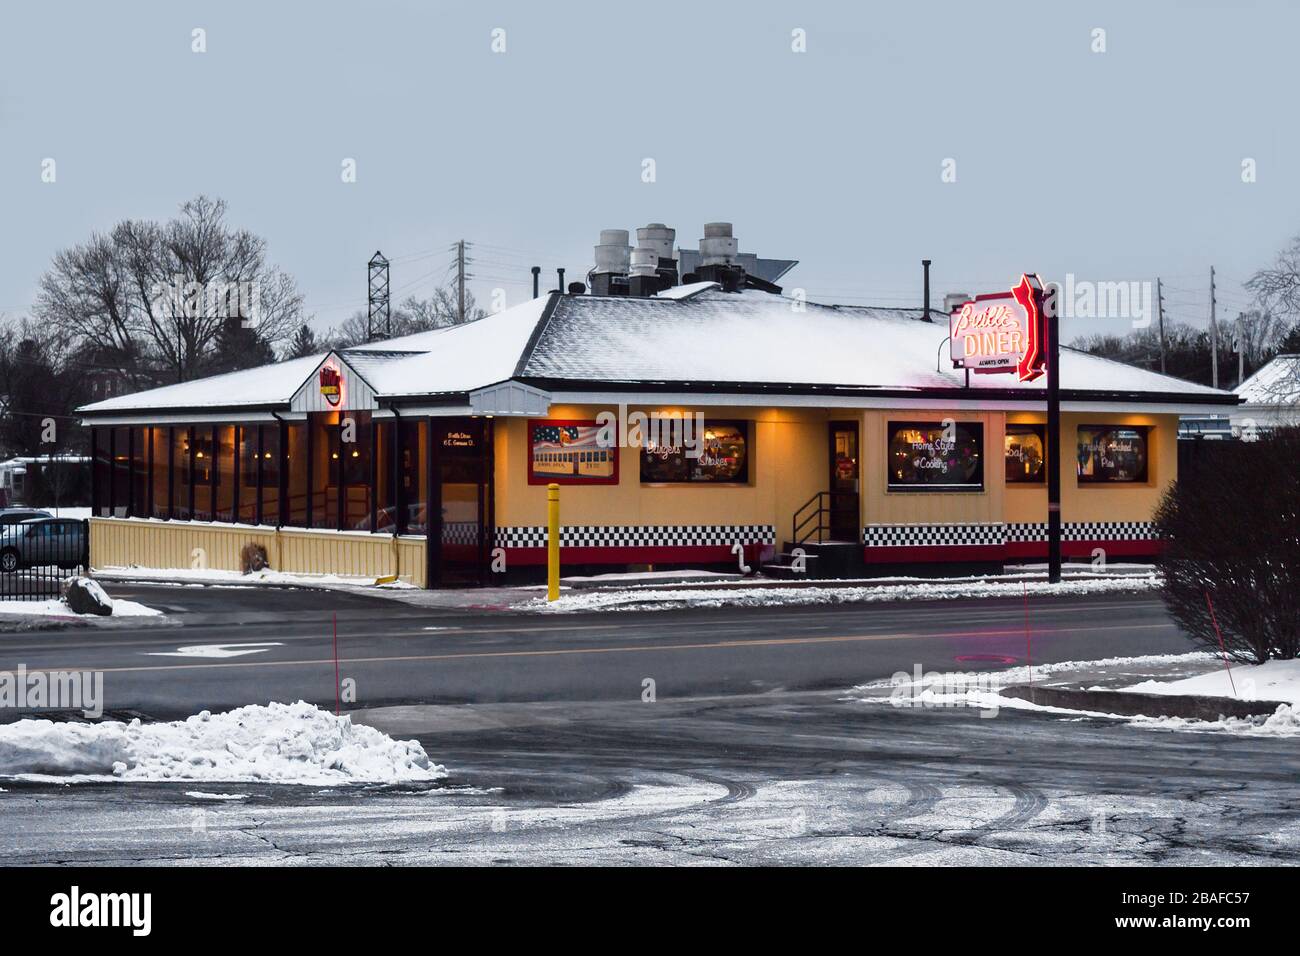 Baldwinsville Diner High Resolution Stock Photography and Images Alamy